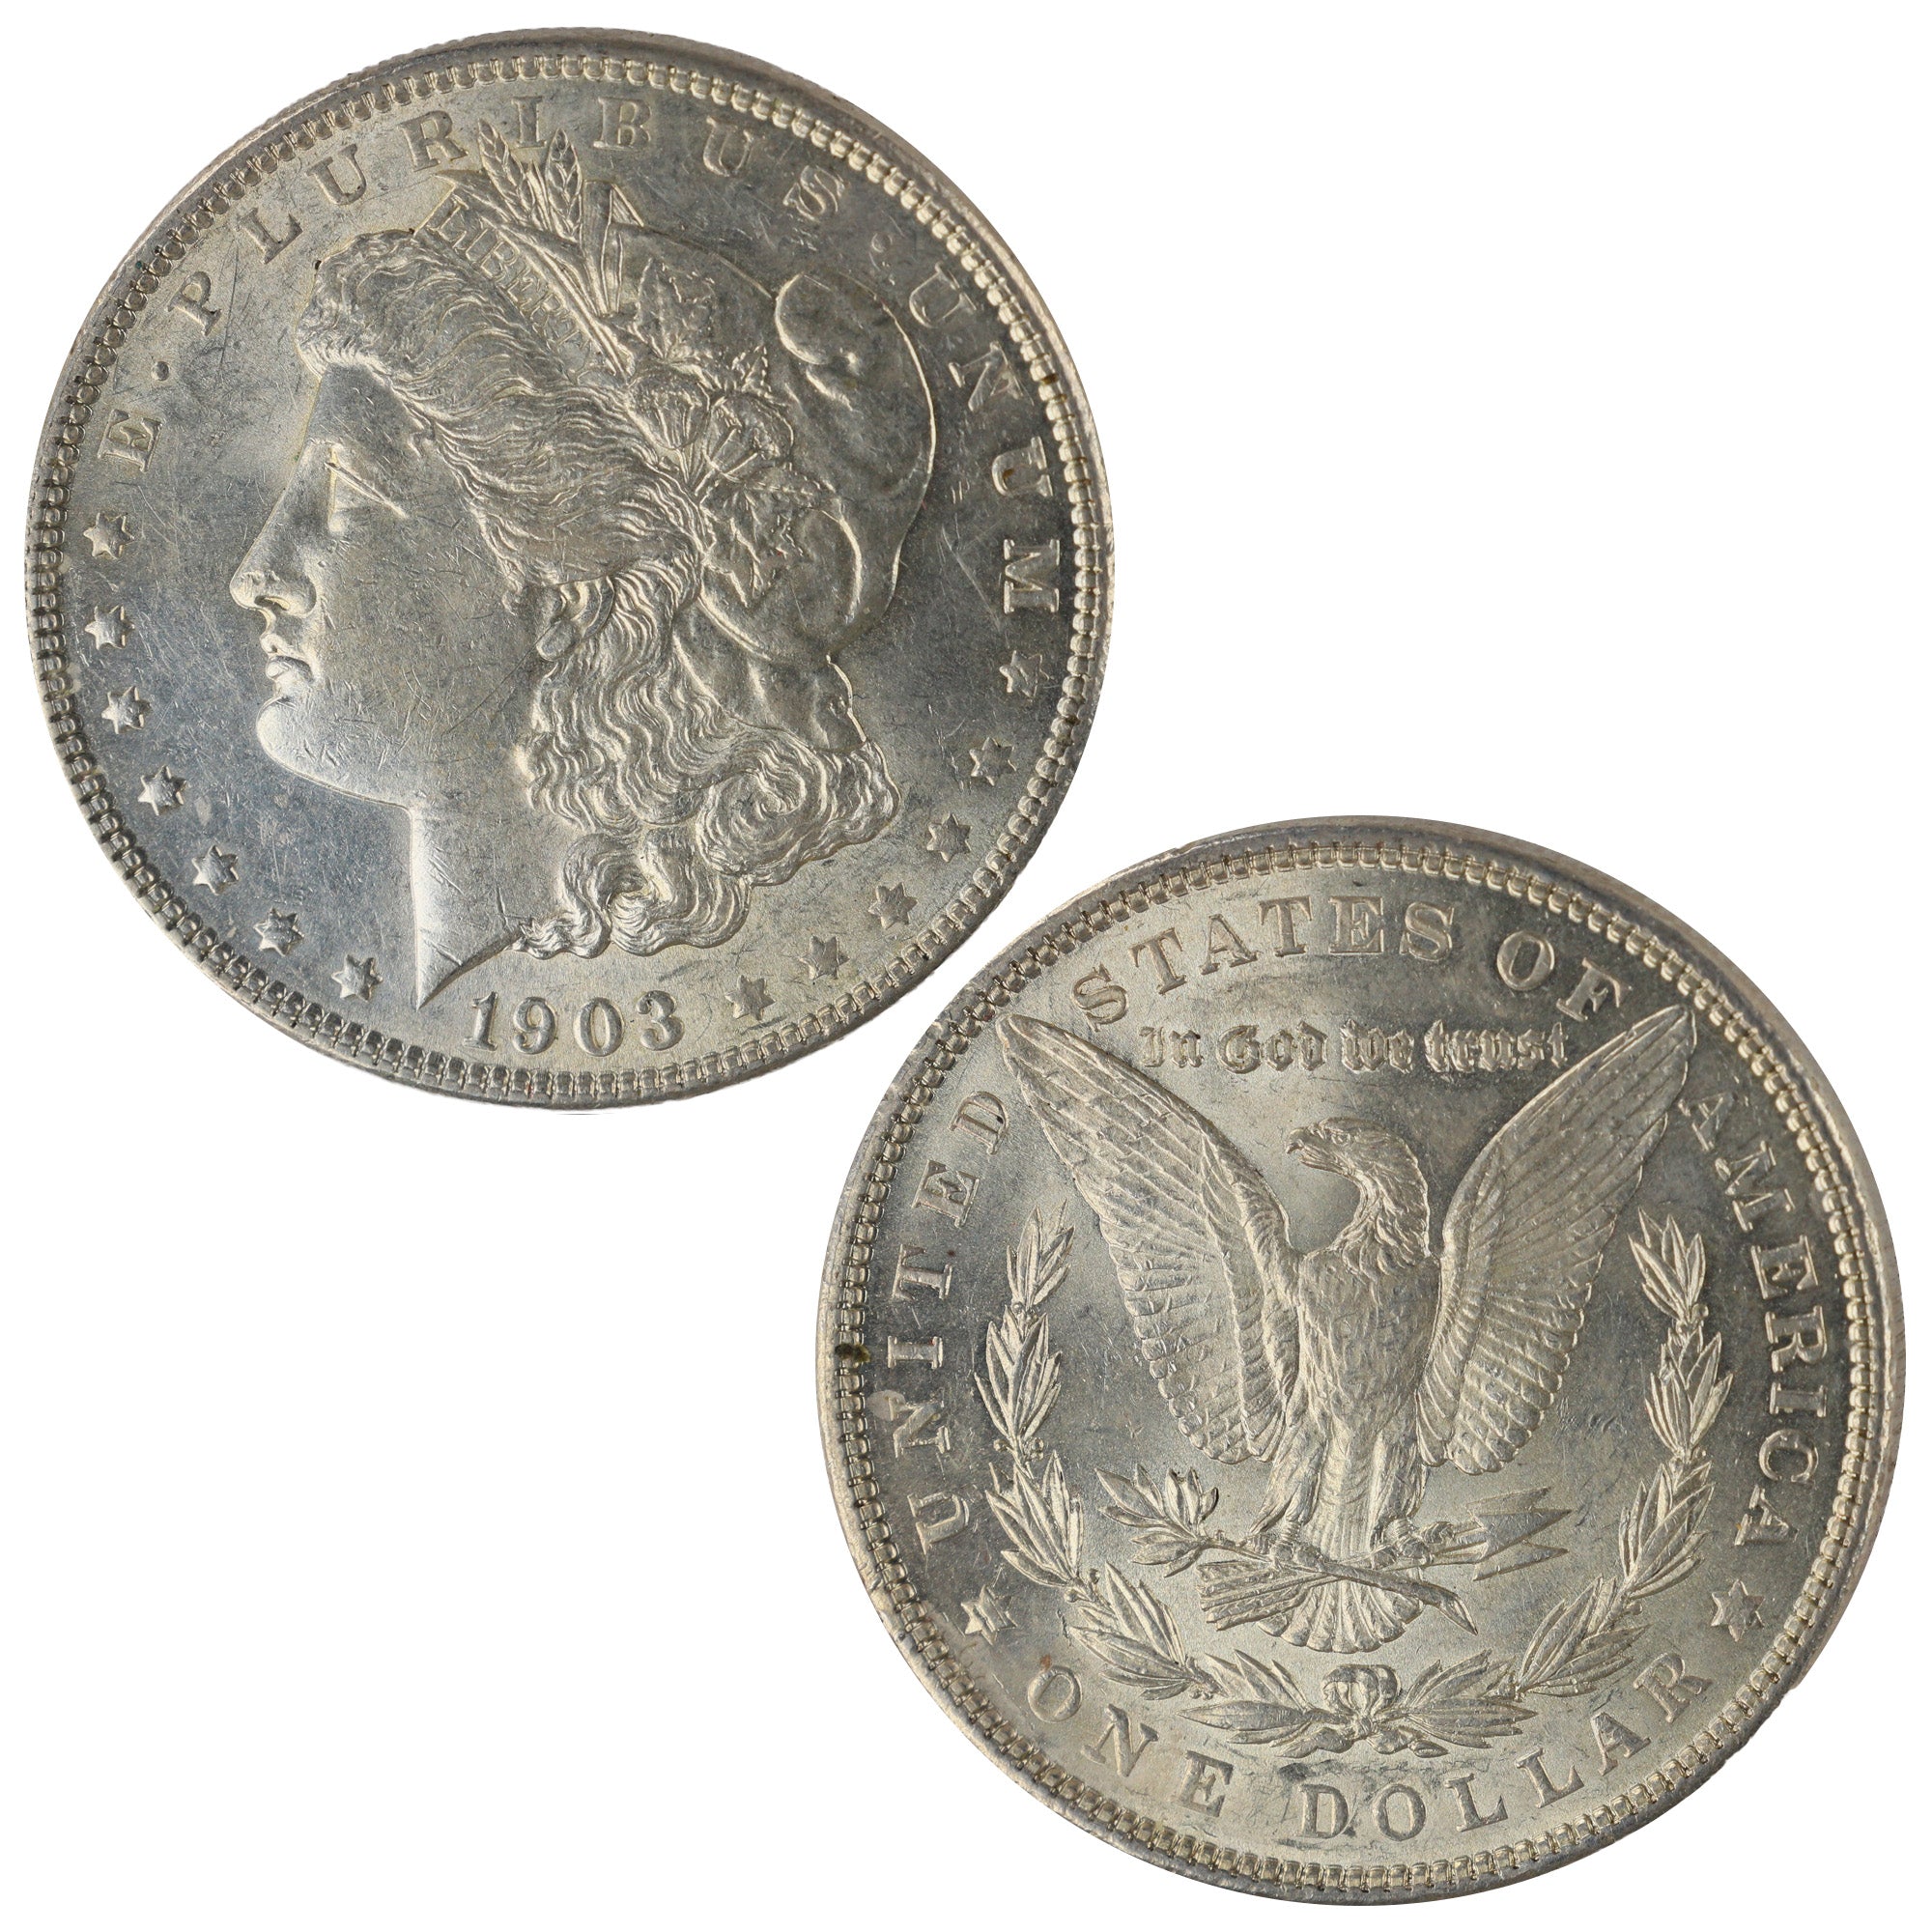 1903 Morgan Dollar AU About Uncirculated Silver $1 Coin SKU:I11990 - Morgan coin - Morgan silver dollar - Morgan silver dollar for sale - Profile Coins &amp; Collectibles